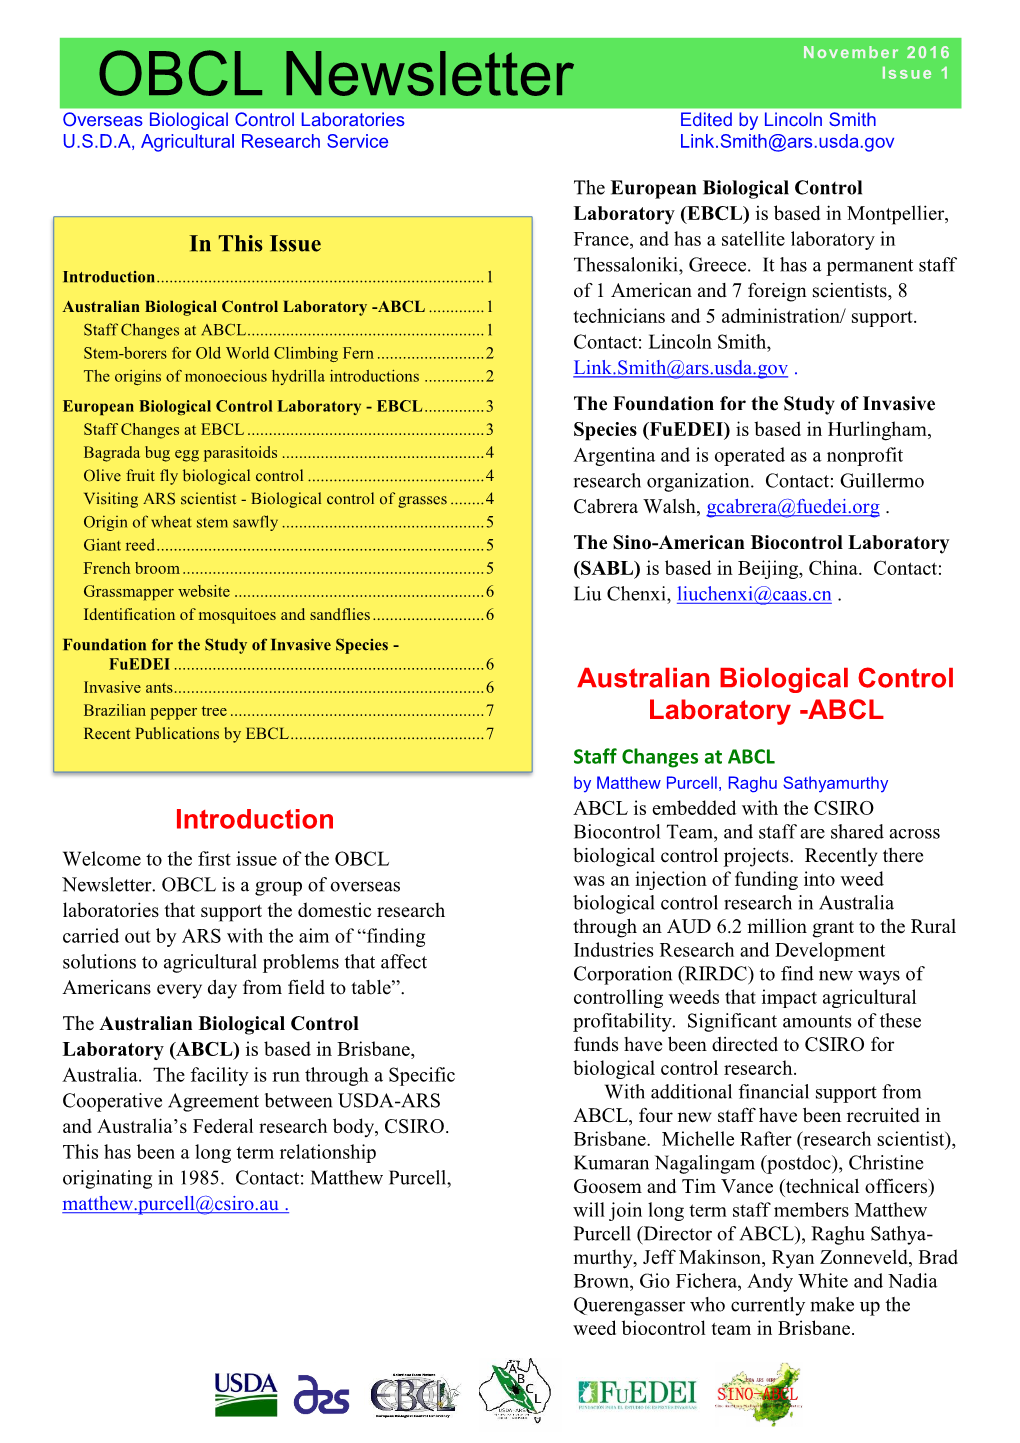 OBCL Newsletter, November 2016 Page 2